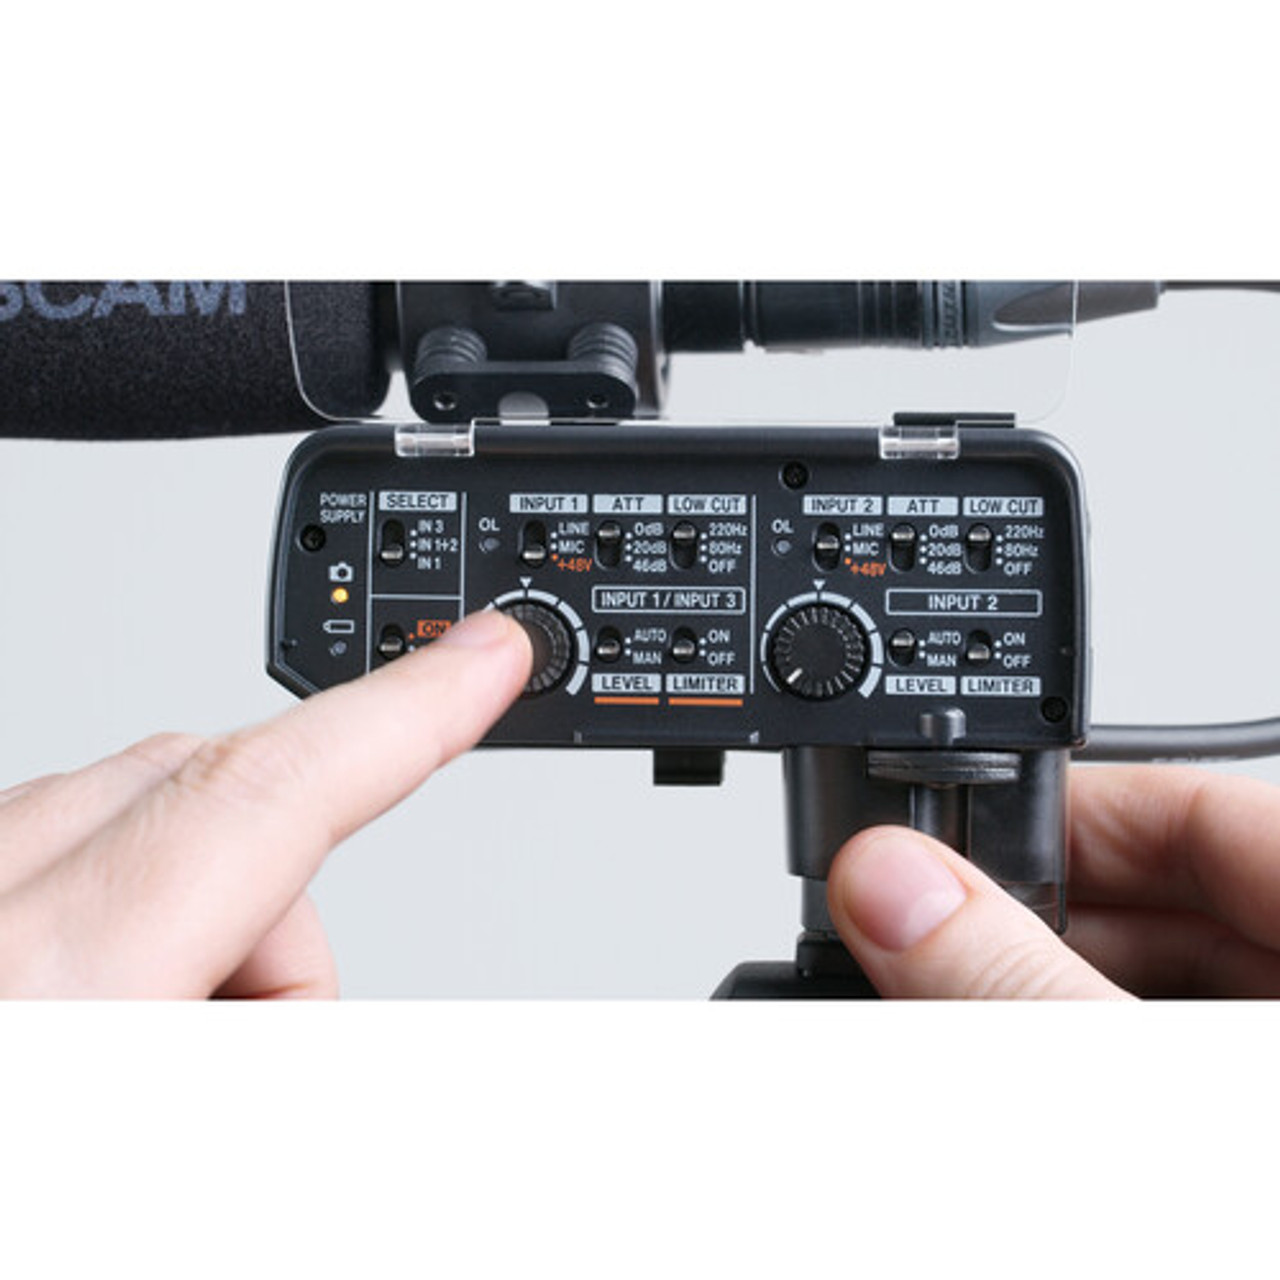 Tascam CA-XLR2d-C XLR Microphone Adapter Kit for Canon Cameras